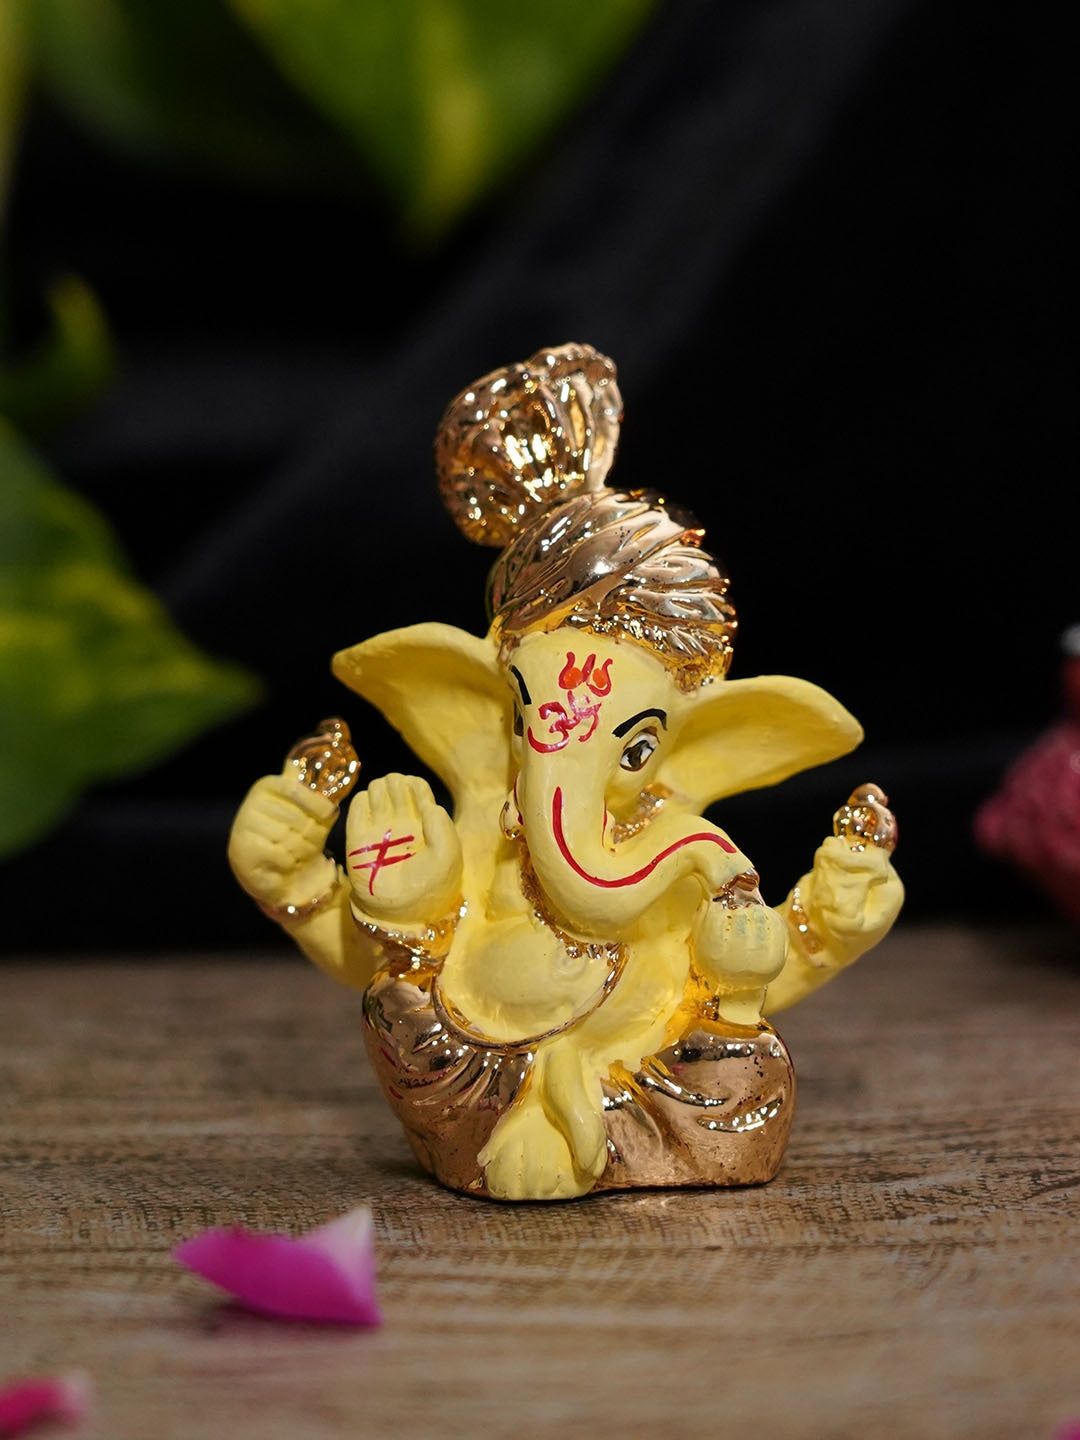 Buy | White and Silver Lord Ganesha Idol Statue Showpiece | Tied Ribbons